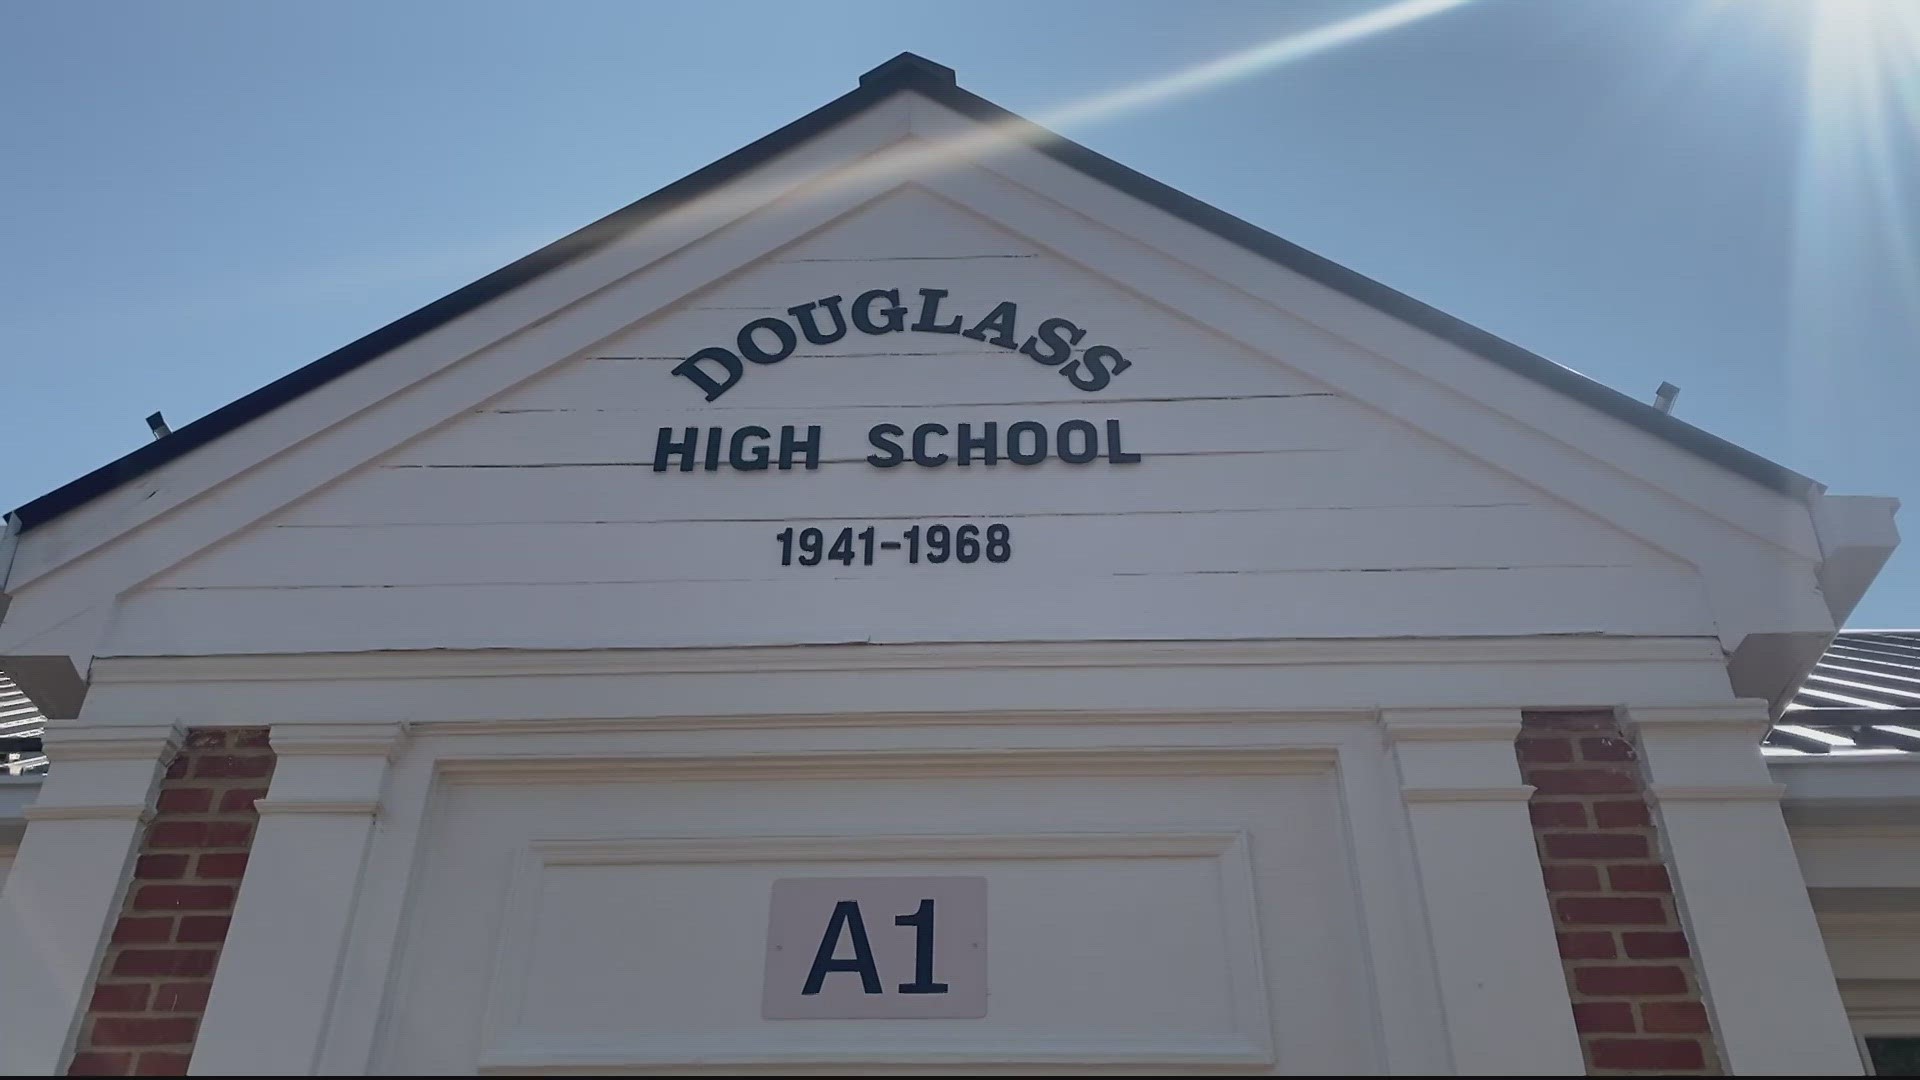 Douglass was founded in 1941 during segregation and was the first and only Black high school in Loudoun County.